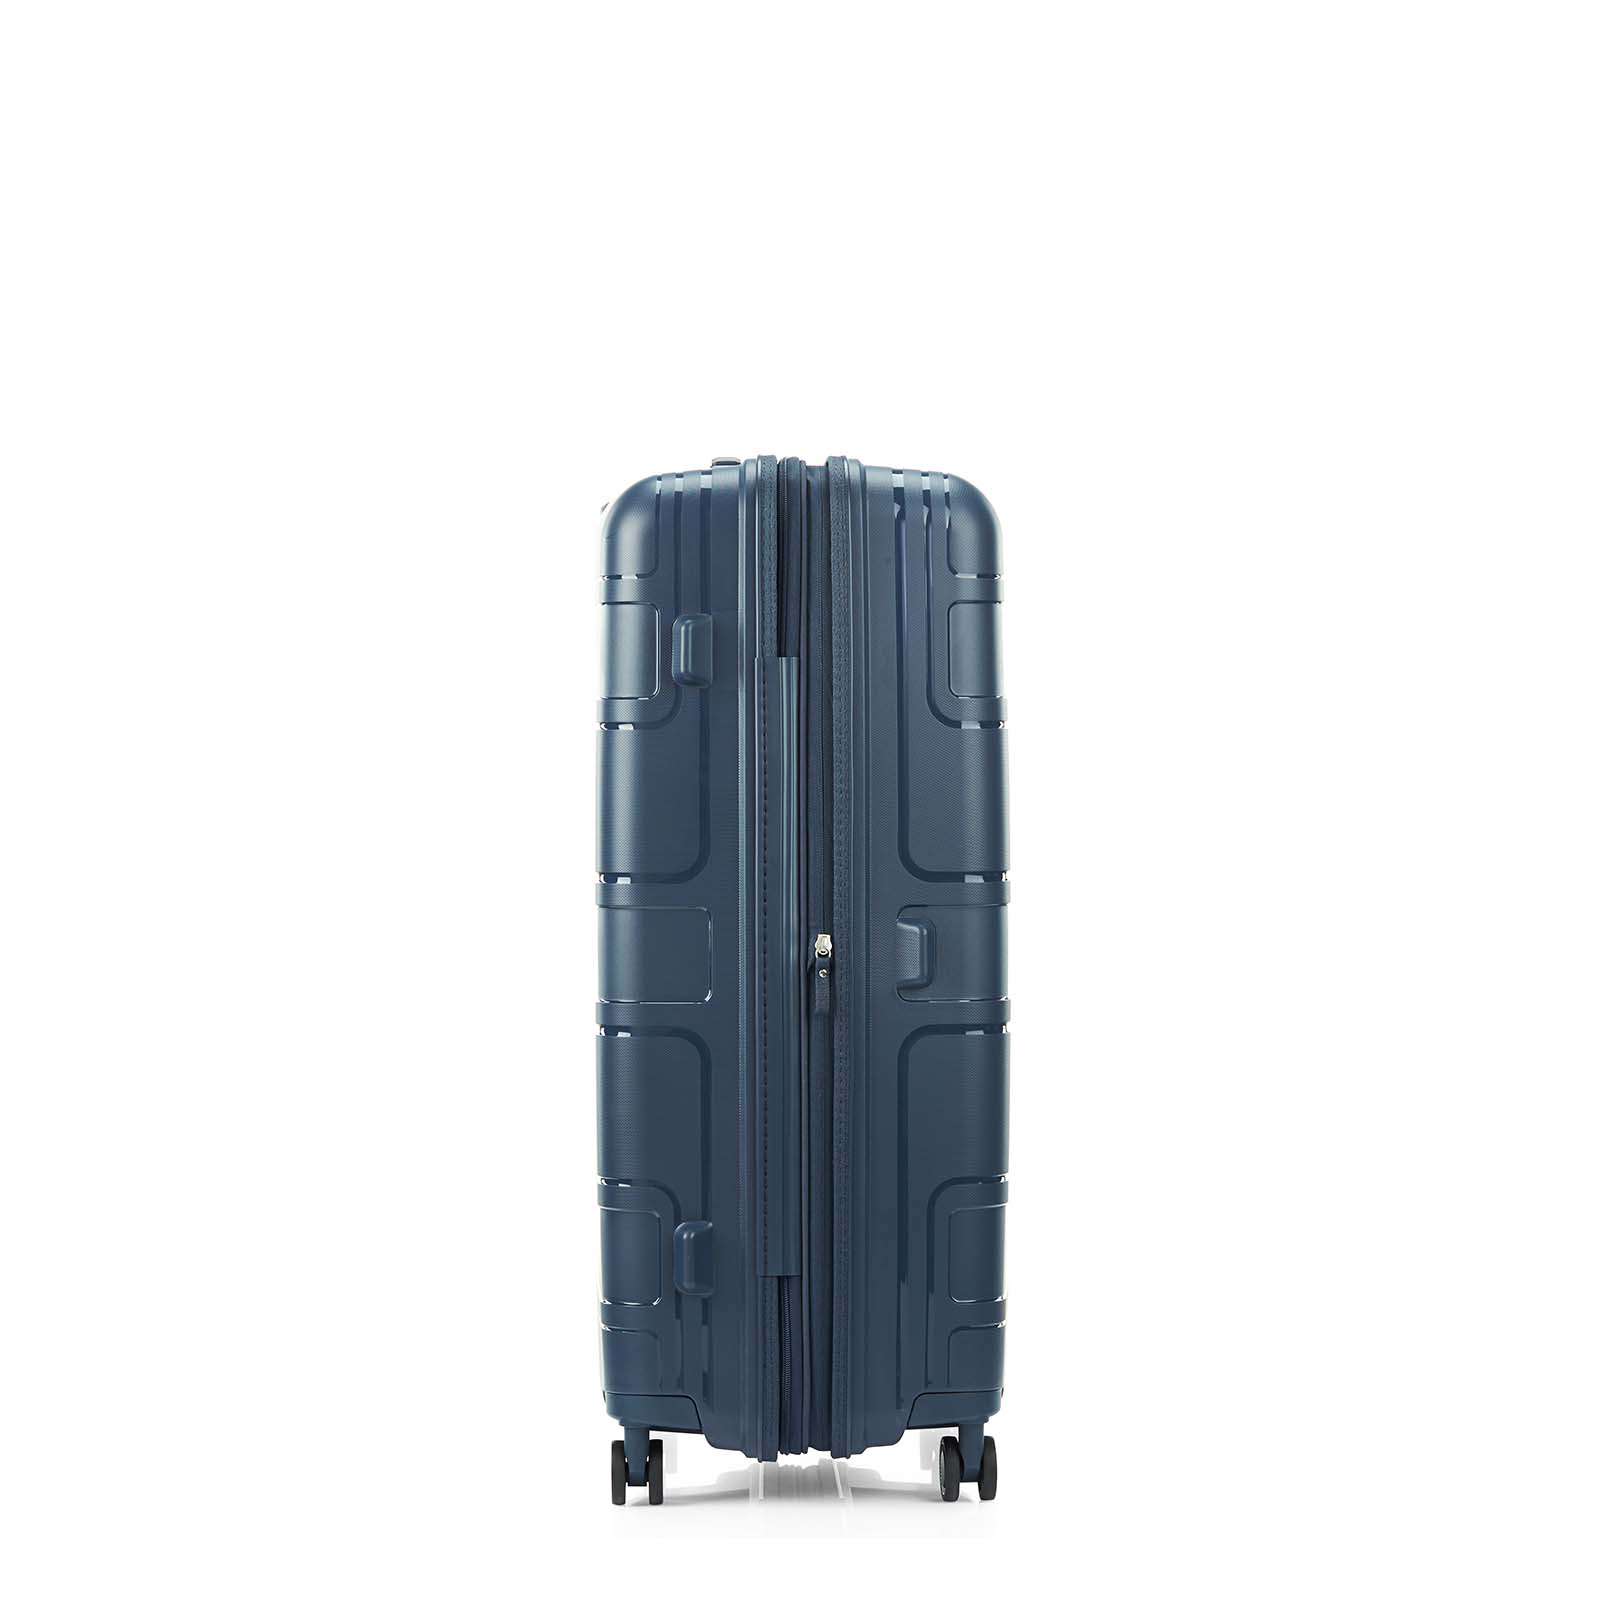 American-Tourister-Light-Max-82cm-Suitcase-Navy-Side